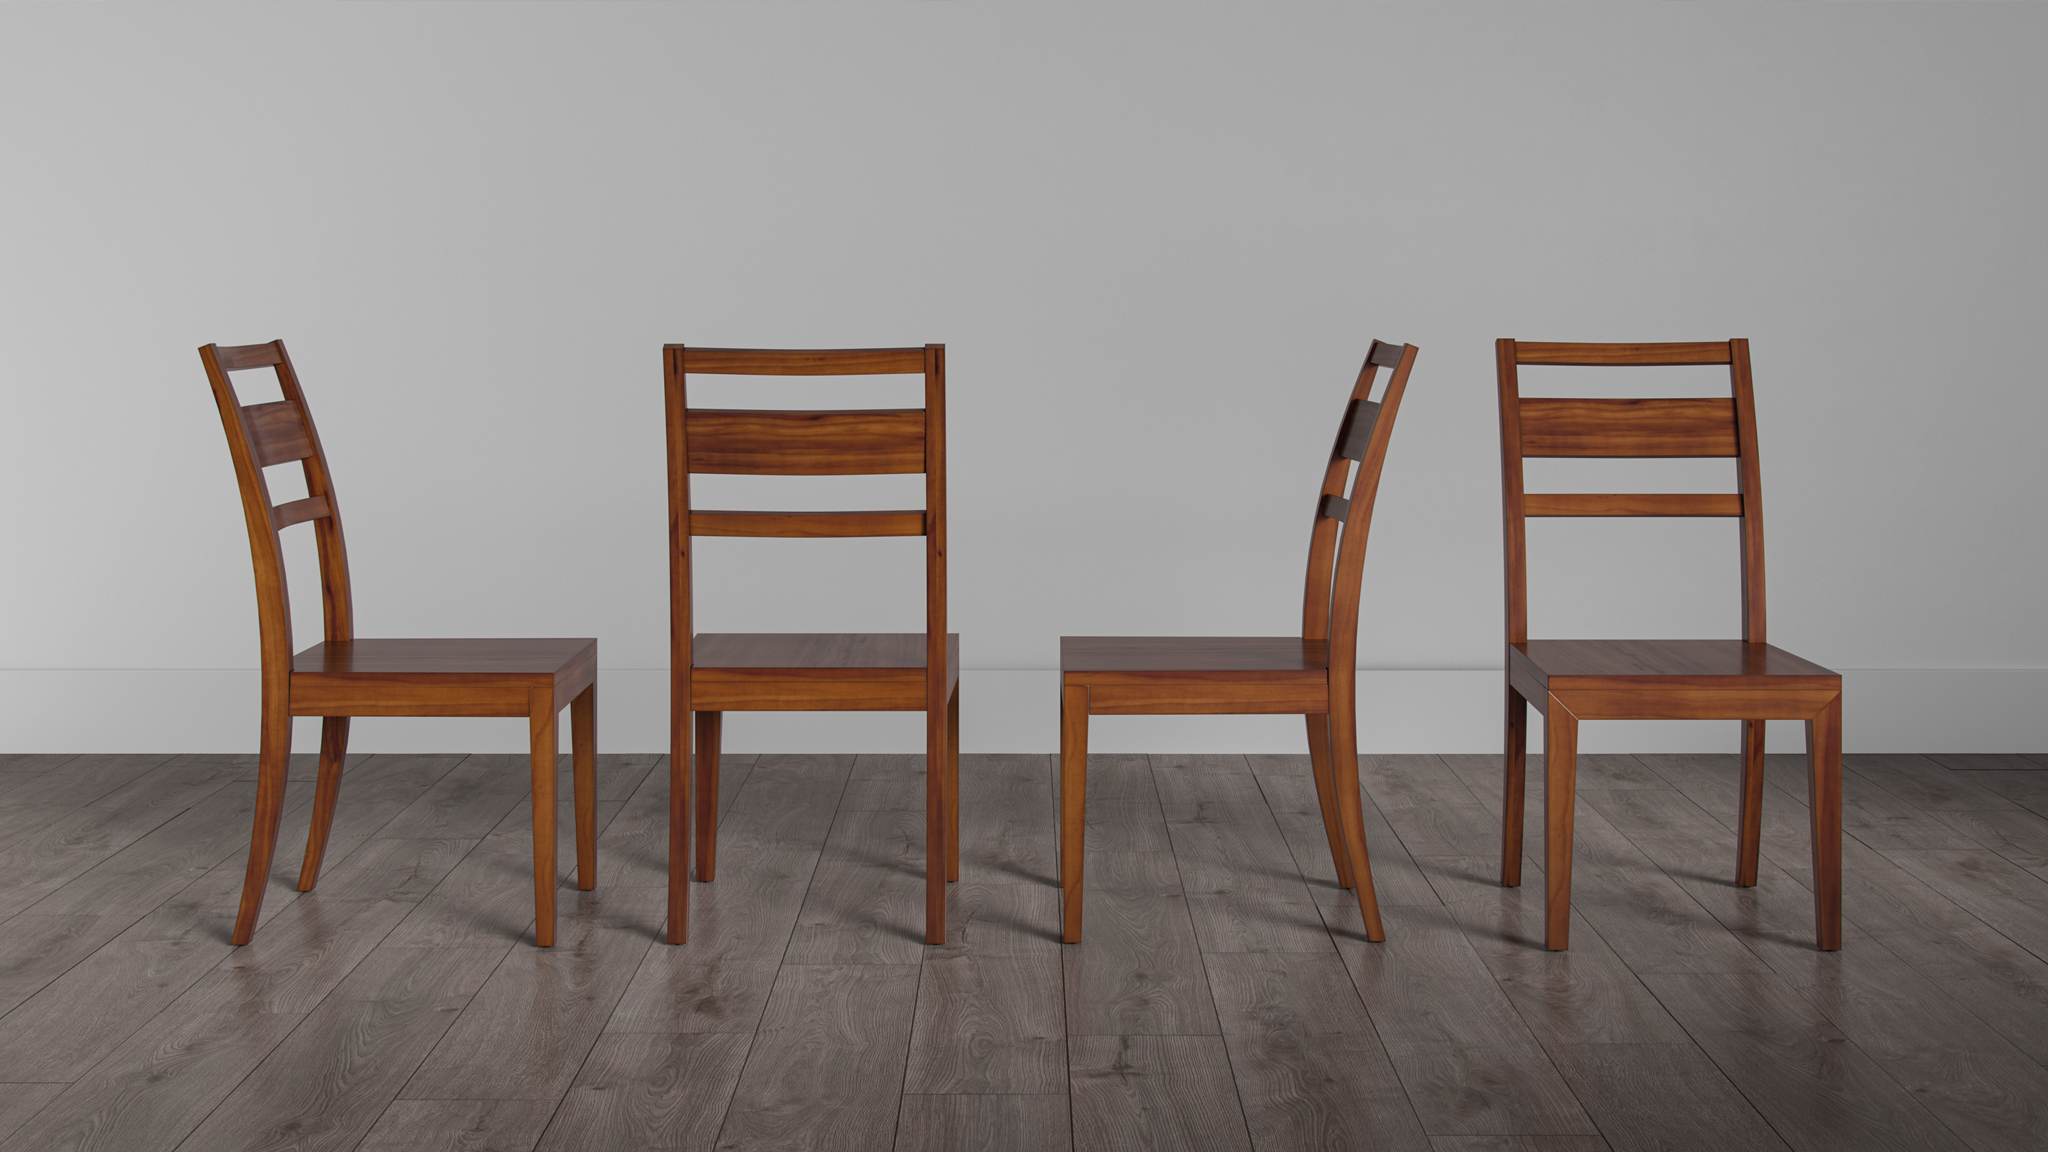 Sophisticated Table 3D Render